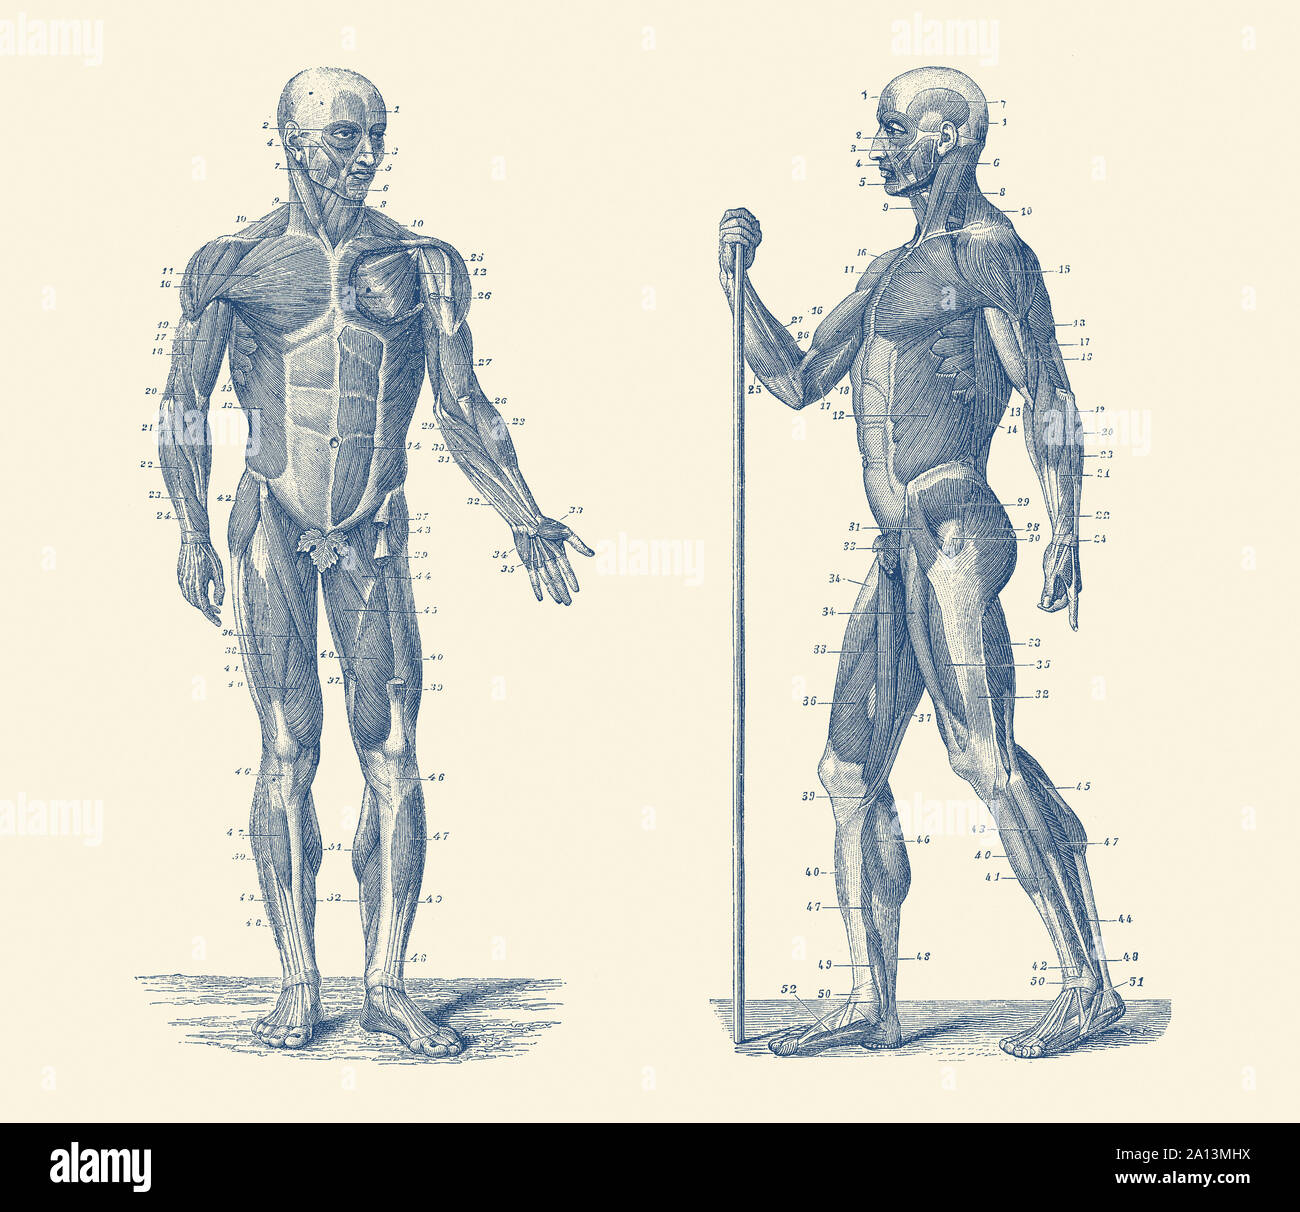 Vintage anatomy print showing a dual view diagram of the human musculoskeletal system. Stock Photo